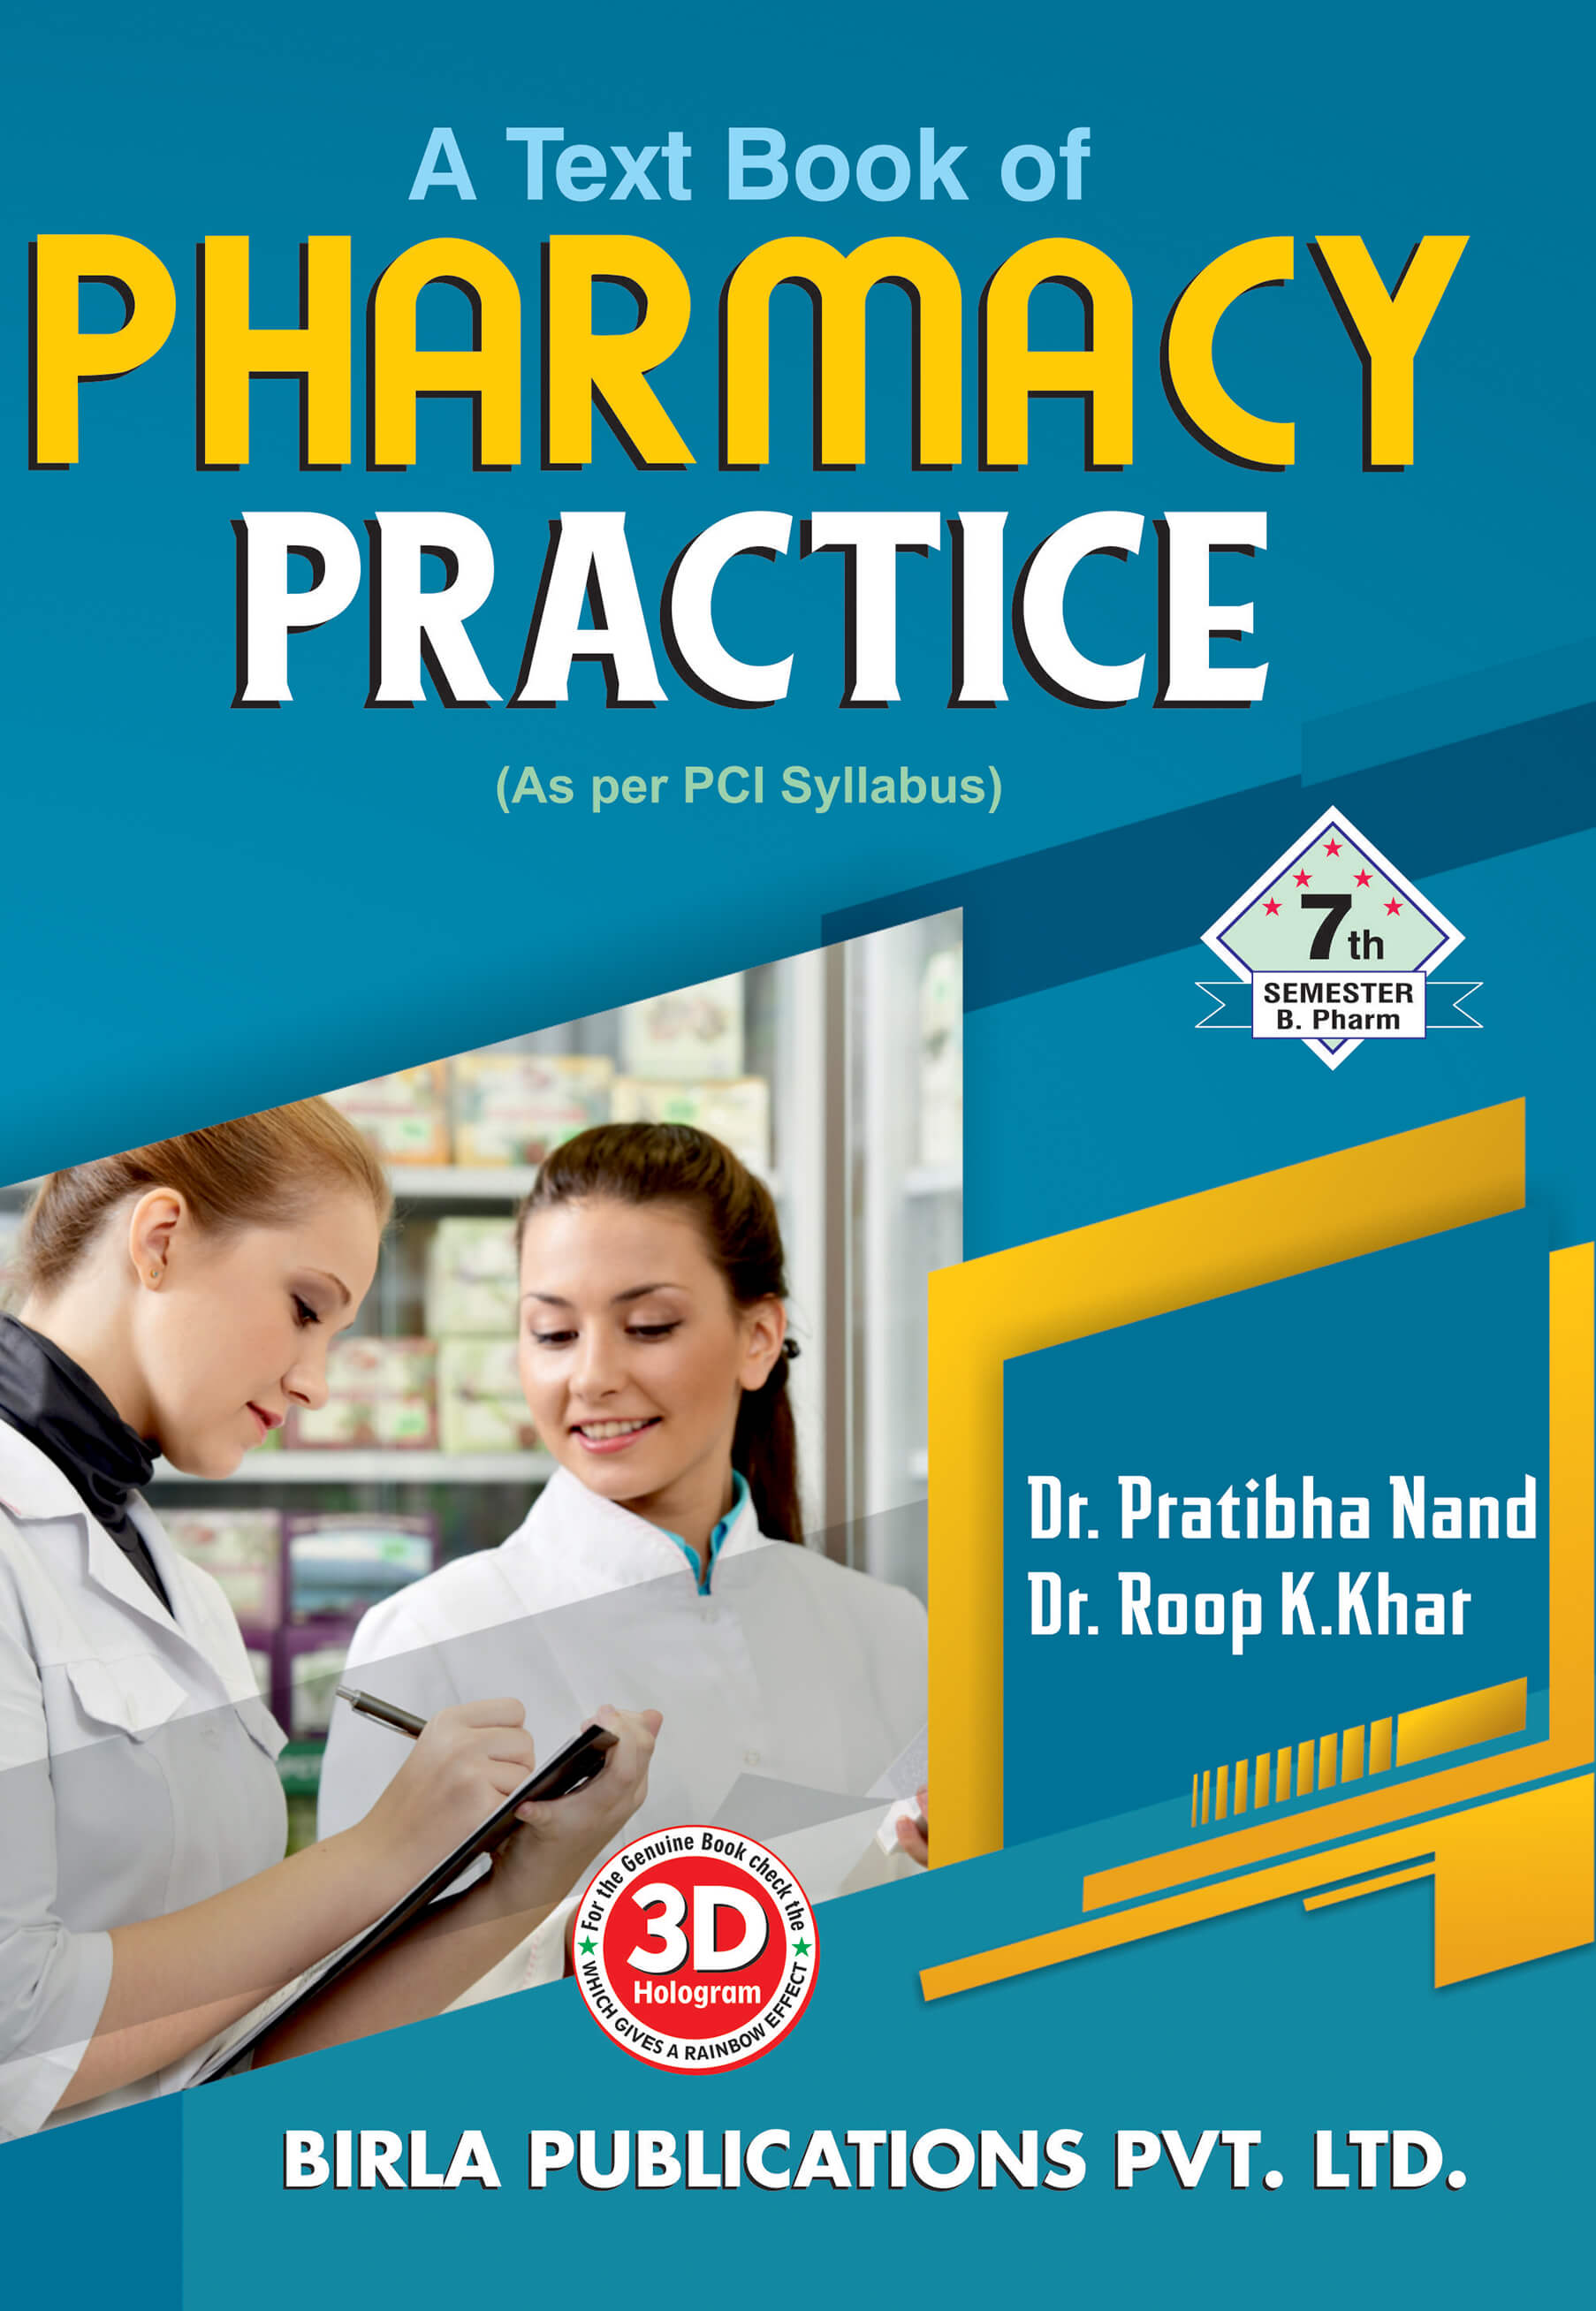 A TEXT BOOK OF PHARMACY PRACTICE